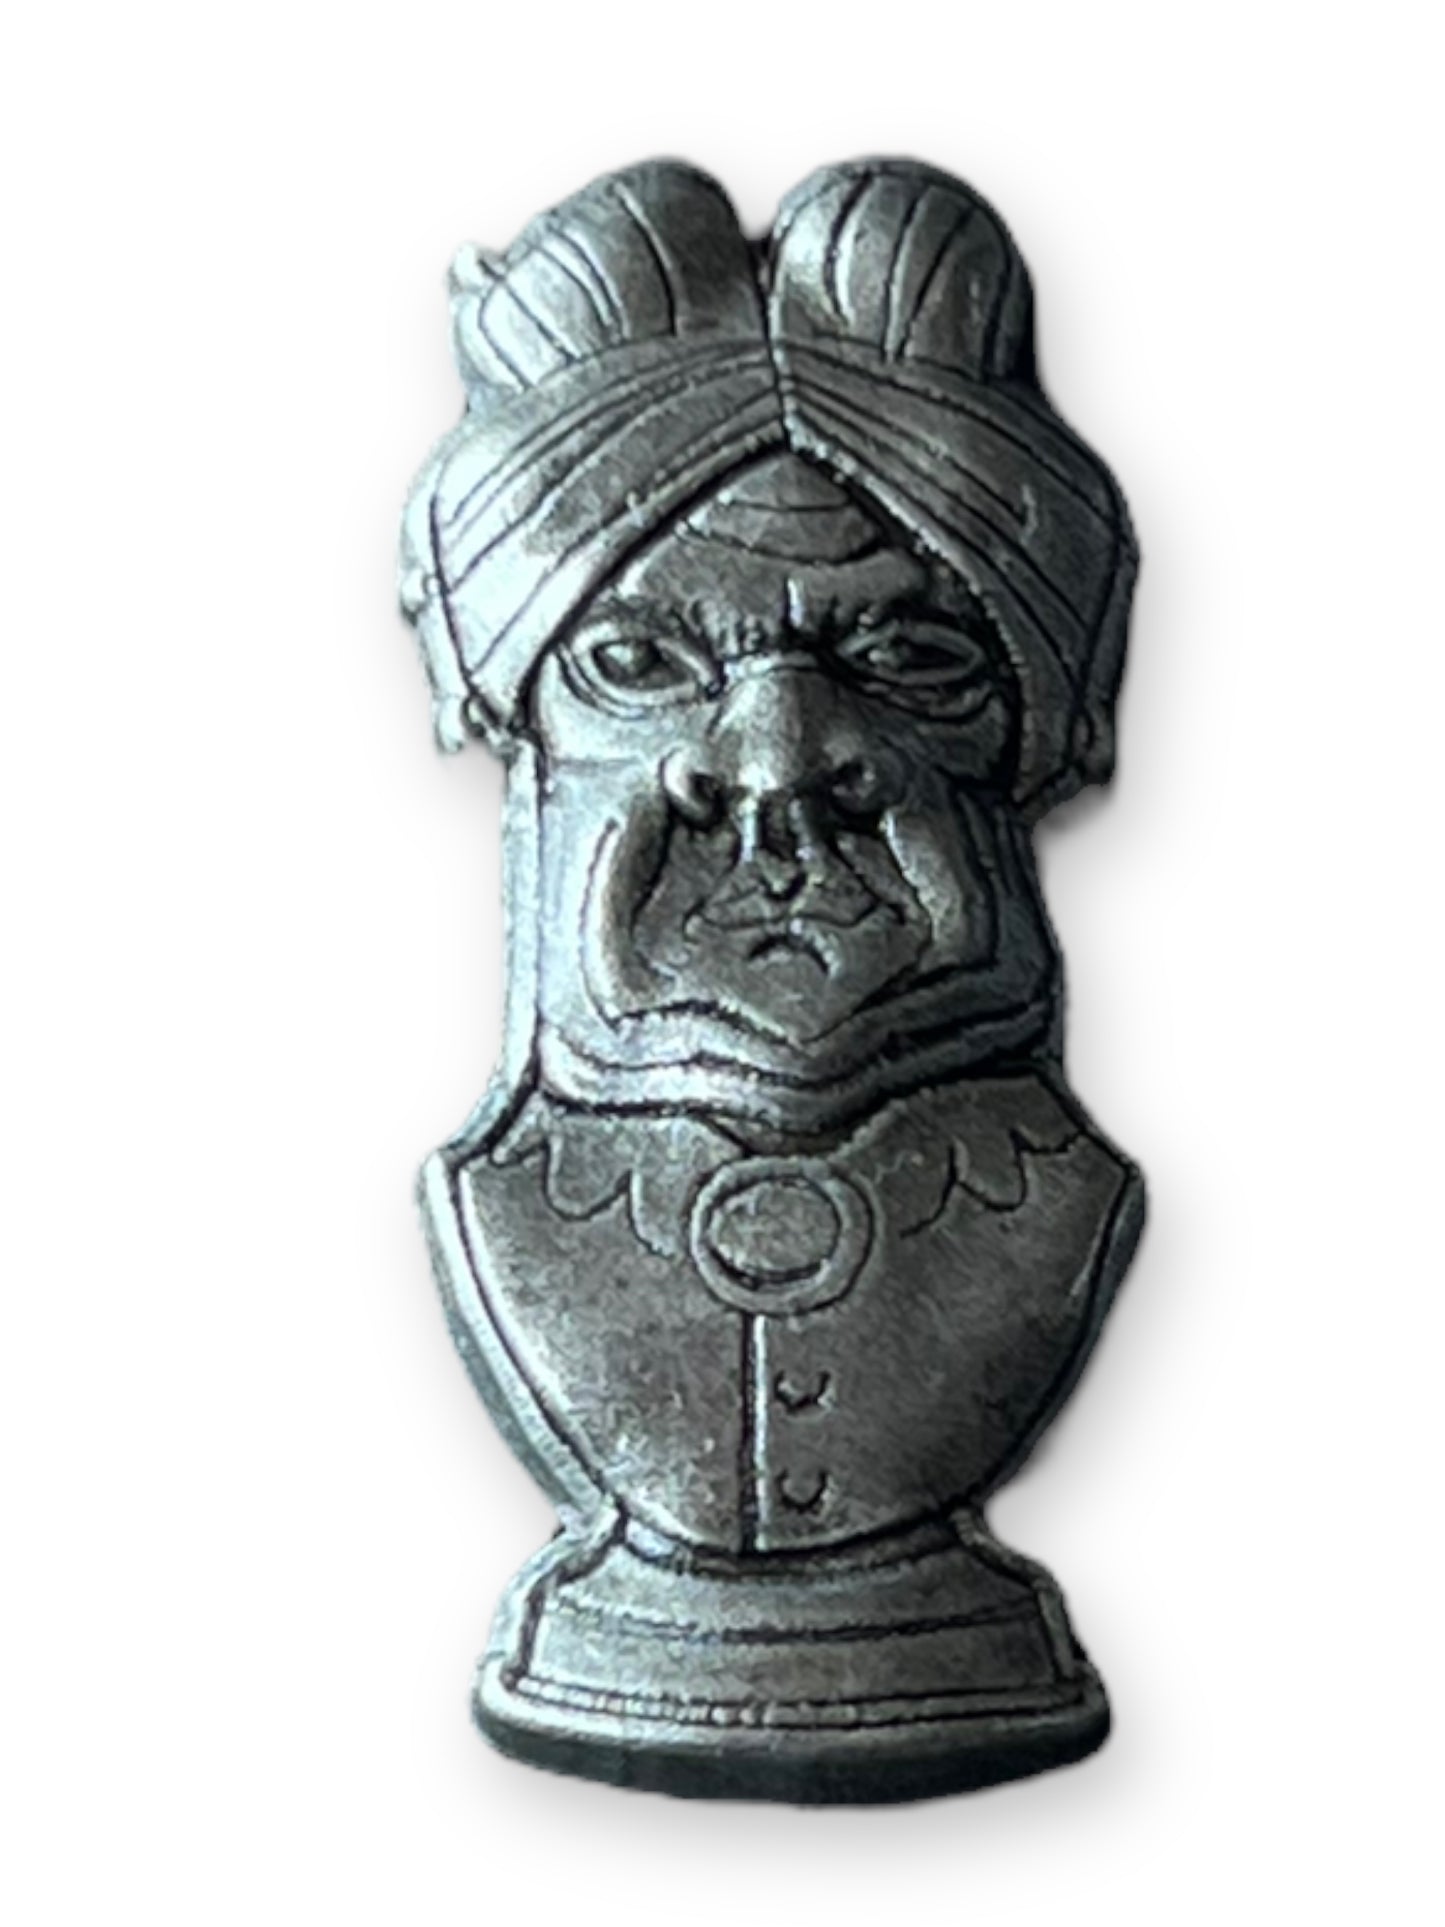 DSSH Haunted Mansion Statue Bust #2 Pin